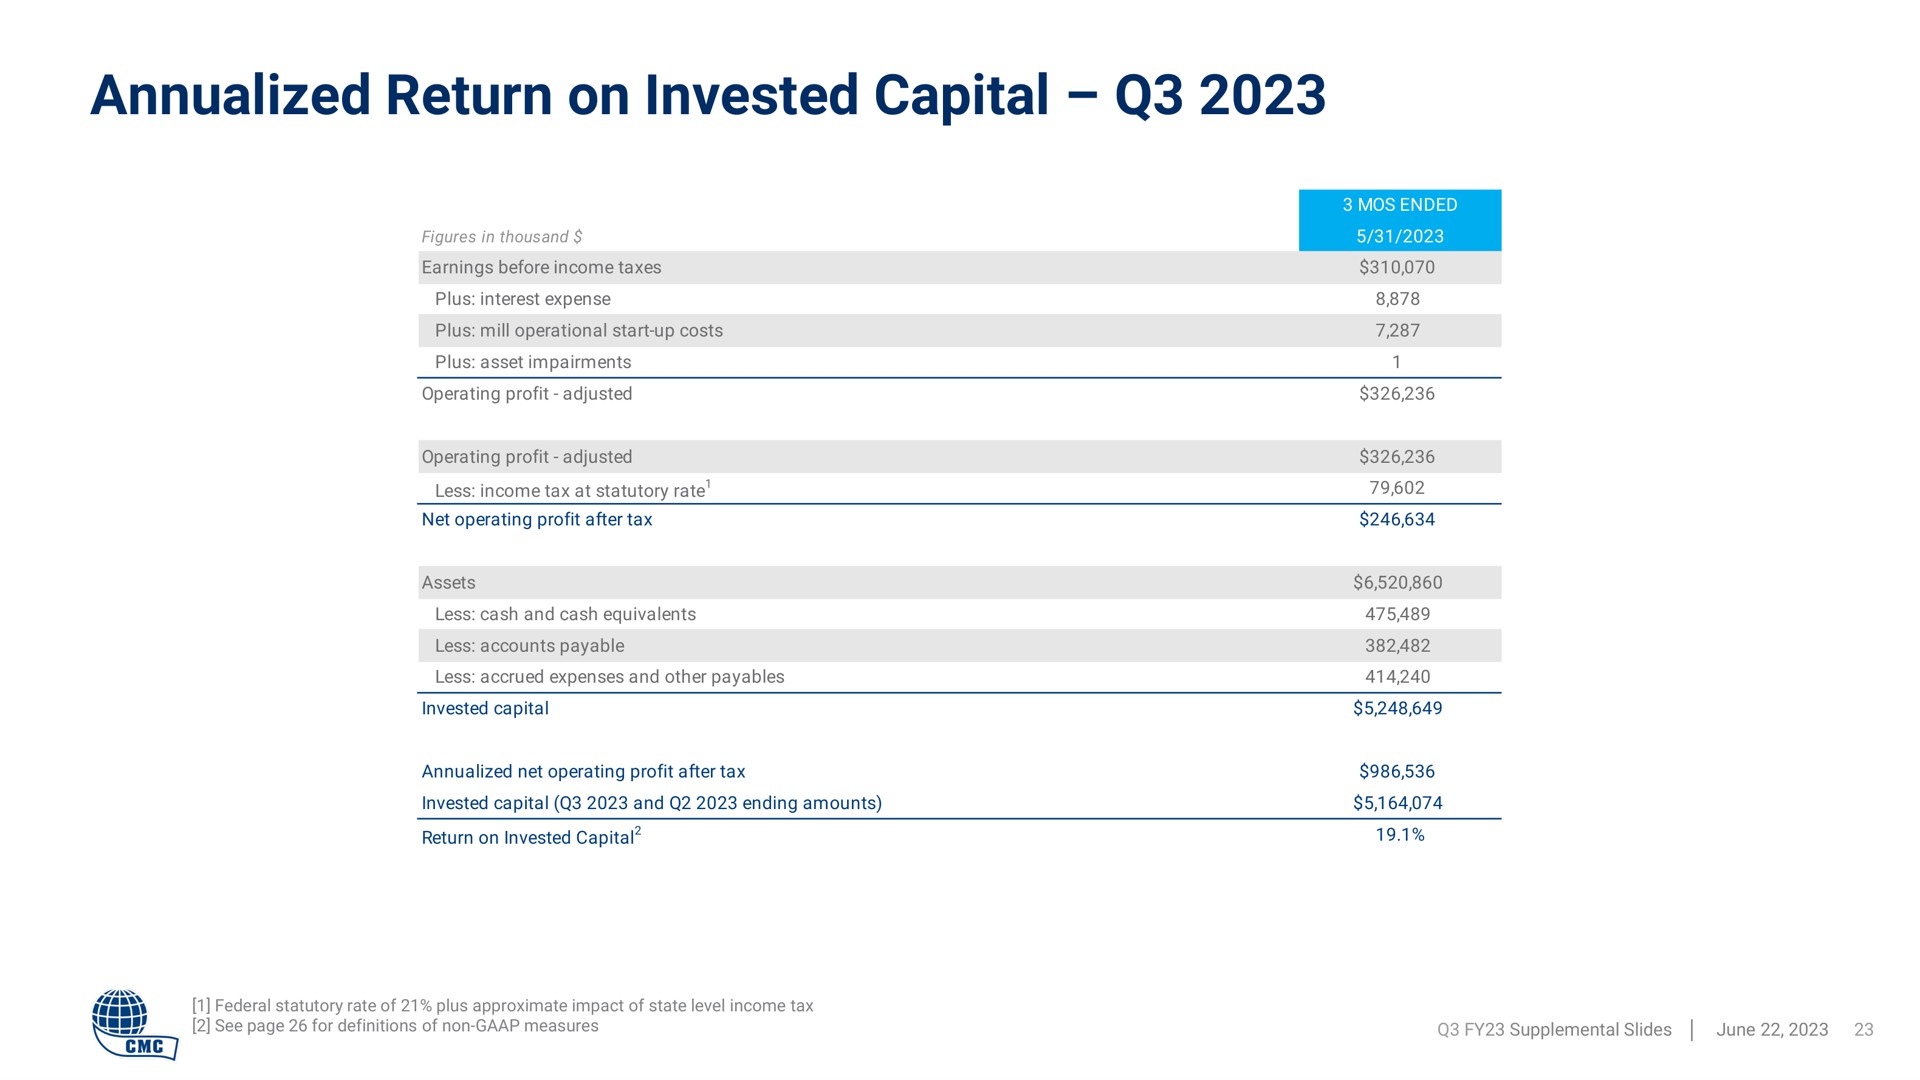 return on invested capital | Commercial Metals Company